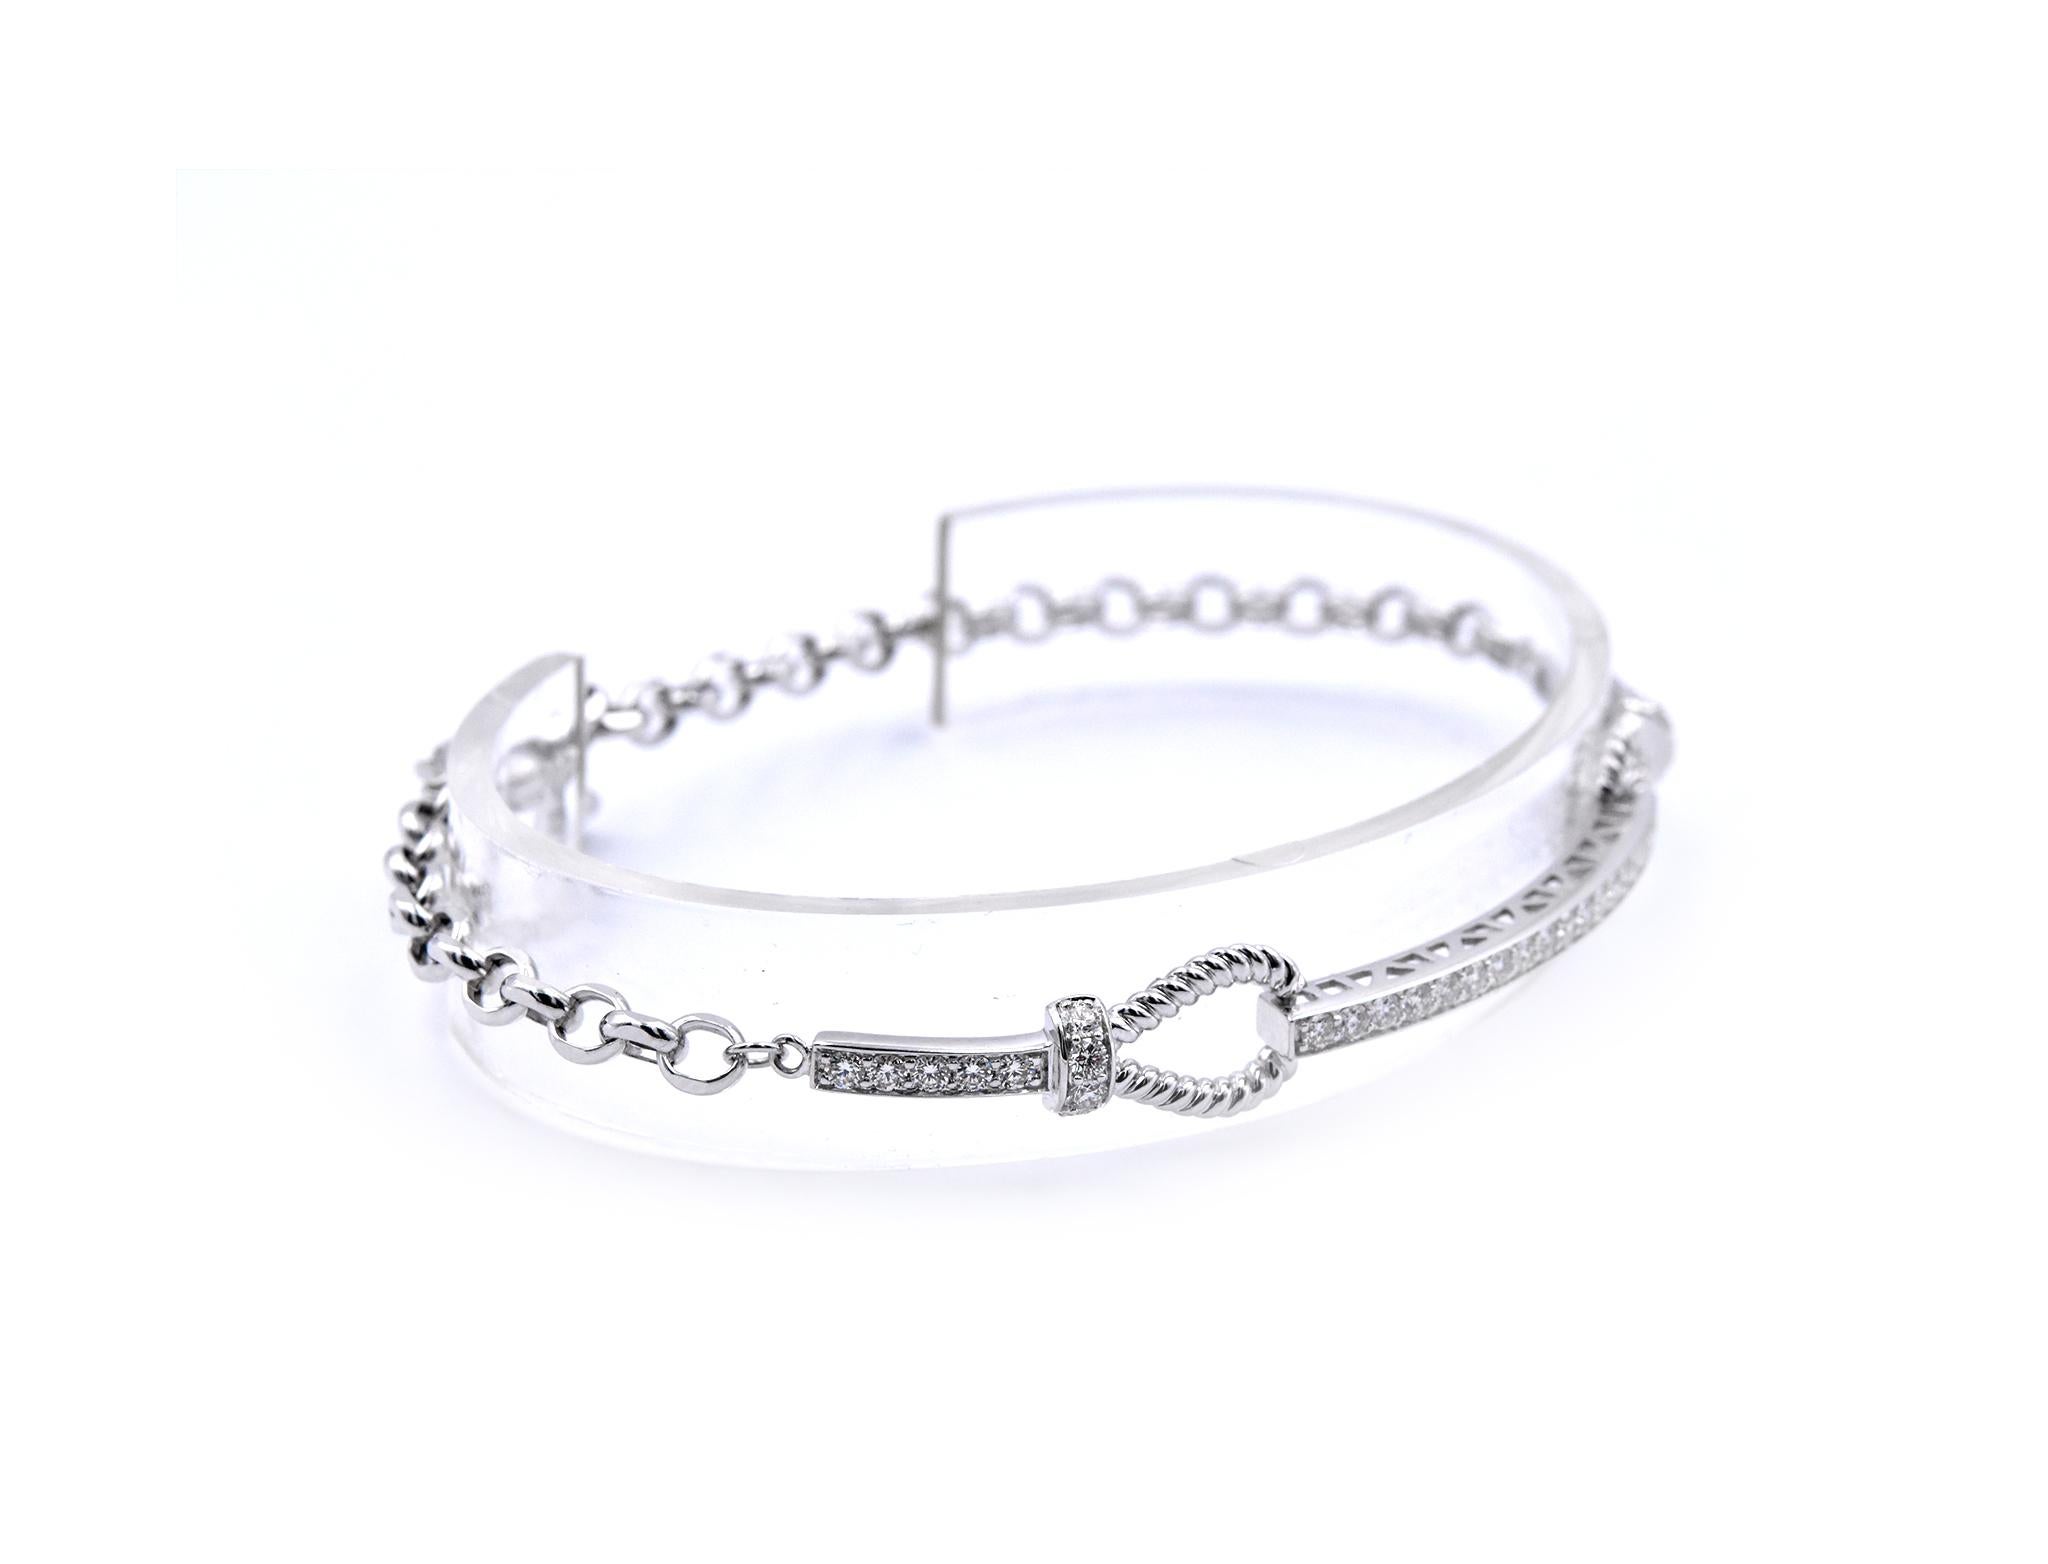 Material: 14k white gold
Diamonds: 36 round brilliant cuts = 1.00cttw
Color: G-H
Clarity: VS
Dimensions: bracelet measures 7 ½ inches in length
Weight: 7.55 grams
